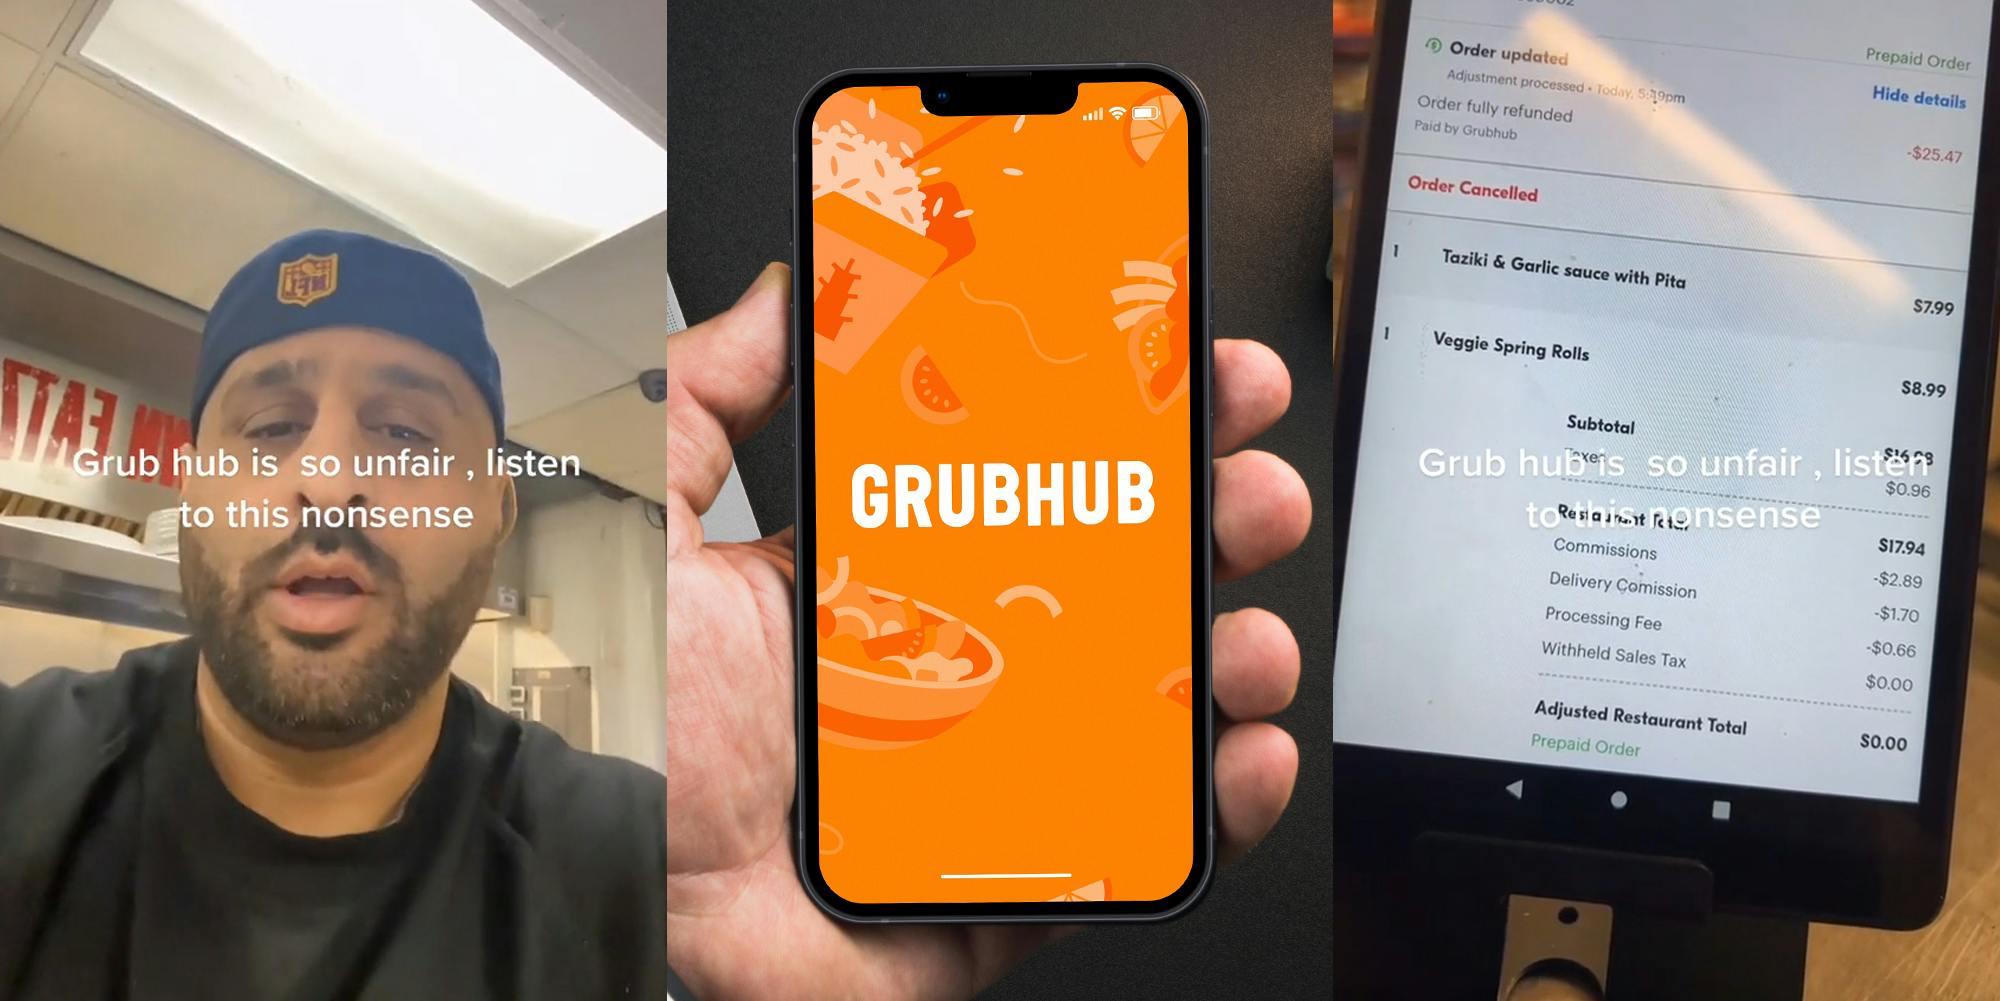 GrubHub employee with caption "Grub Hub is so unfair, listen to this nonsense" (l) GrubHub on phone in hand in front of grey background (c) GrubHub order on screen with caption "Grub Hub is so unfair, listen to this nonsense" (r)